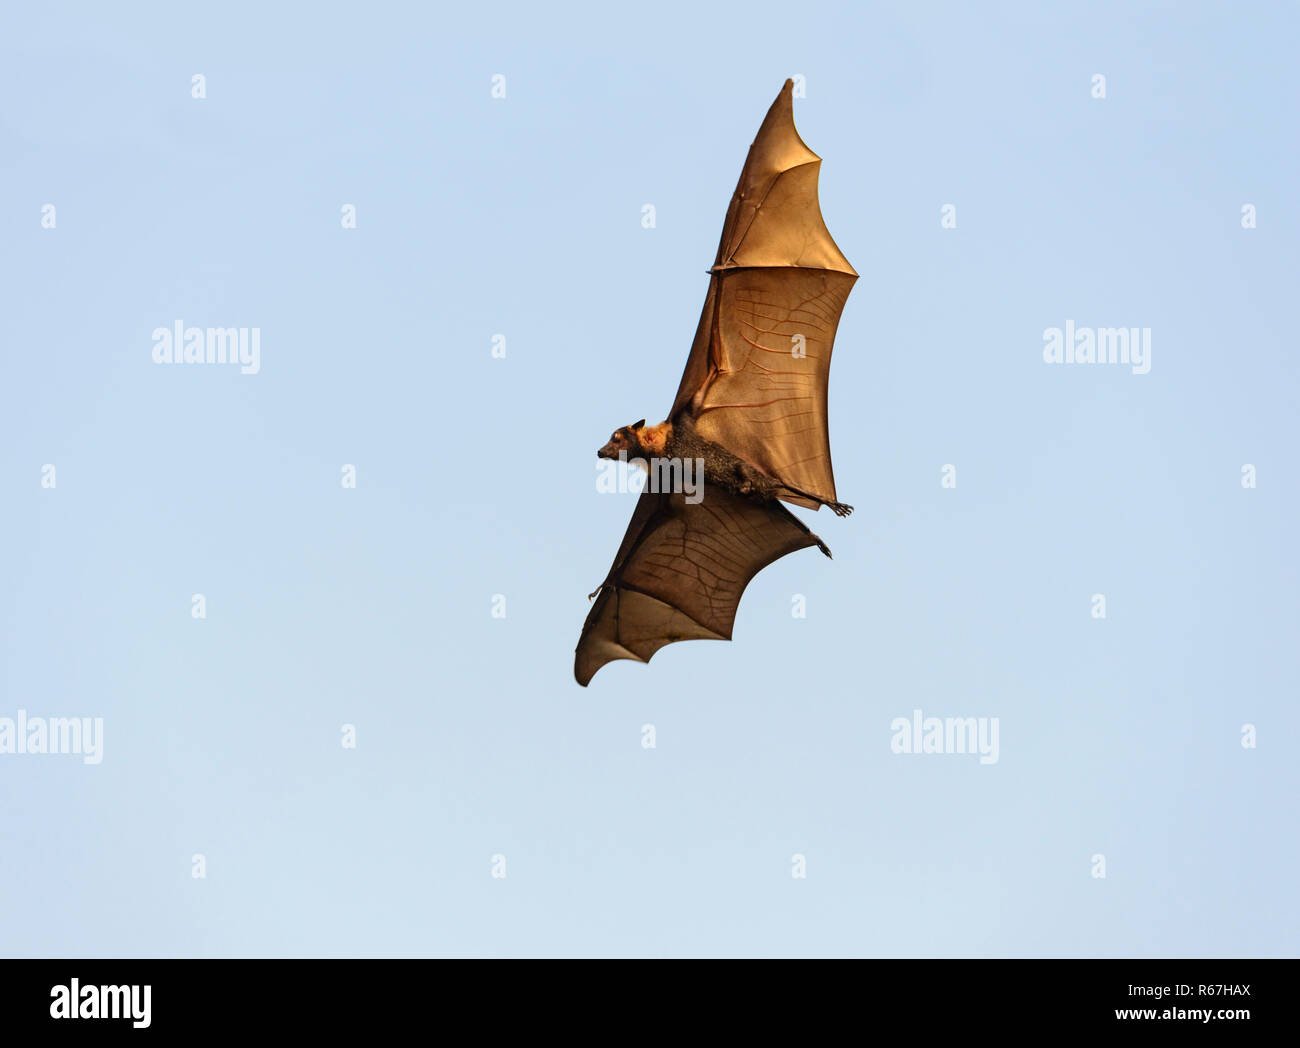 Spectacled flying fox or Spectacled Fruit Bat (Pteropus conspicillatus), is a megabat that lives in Queensland, Australia Stock Photo